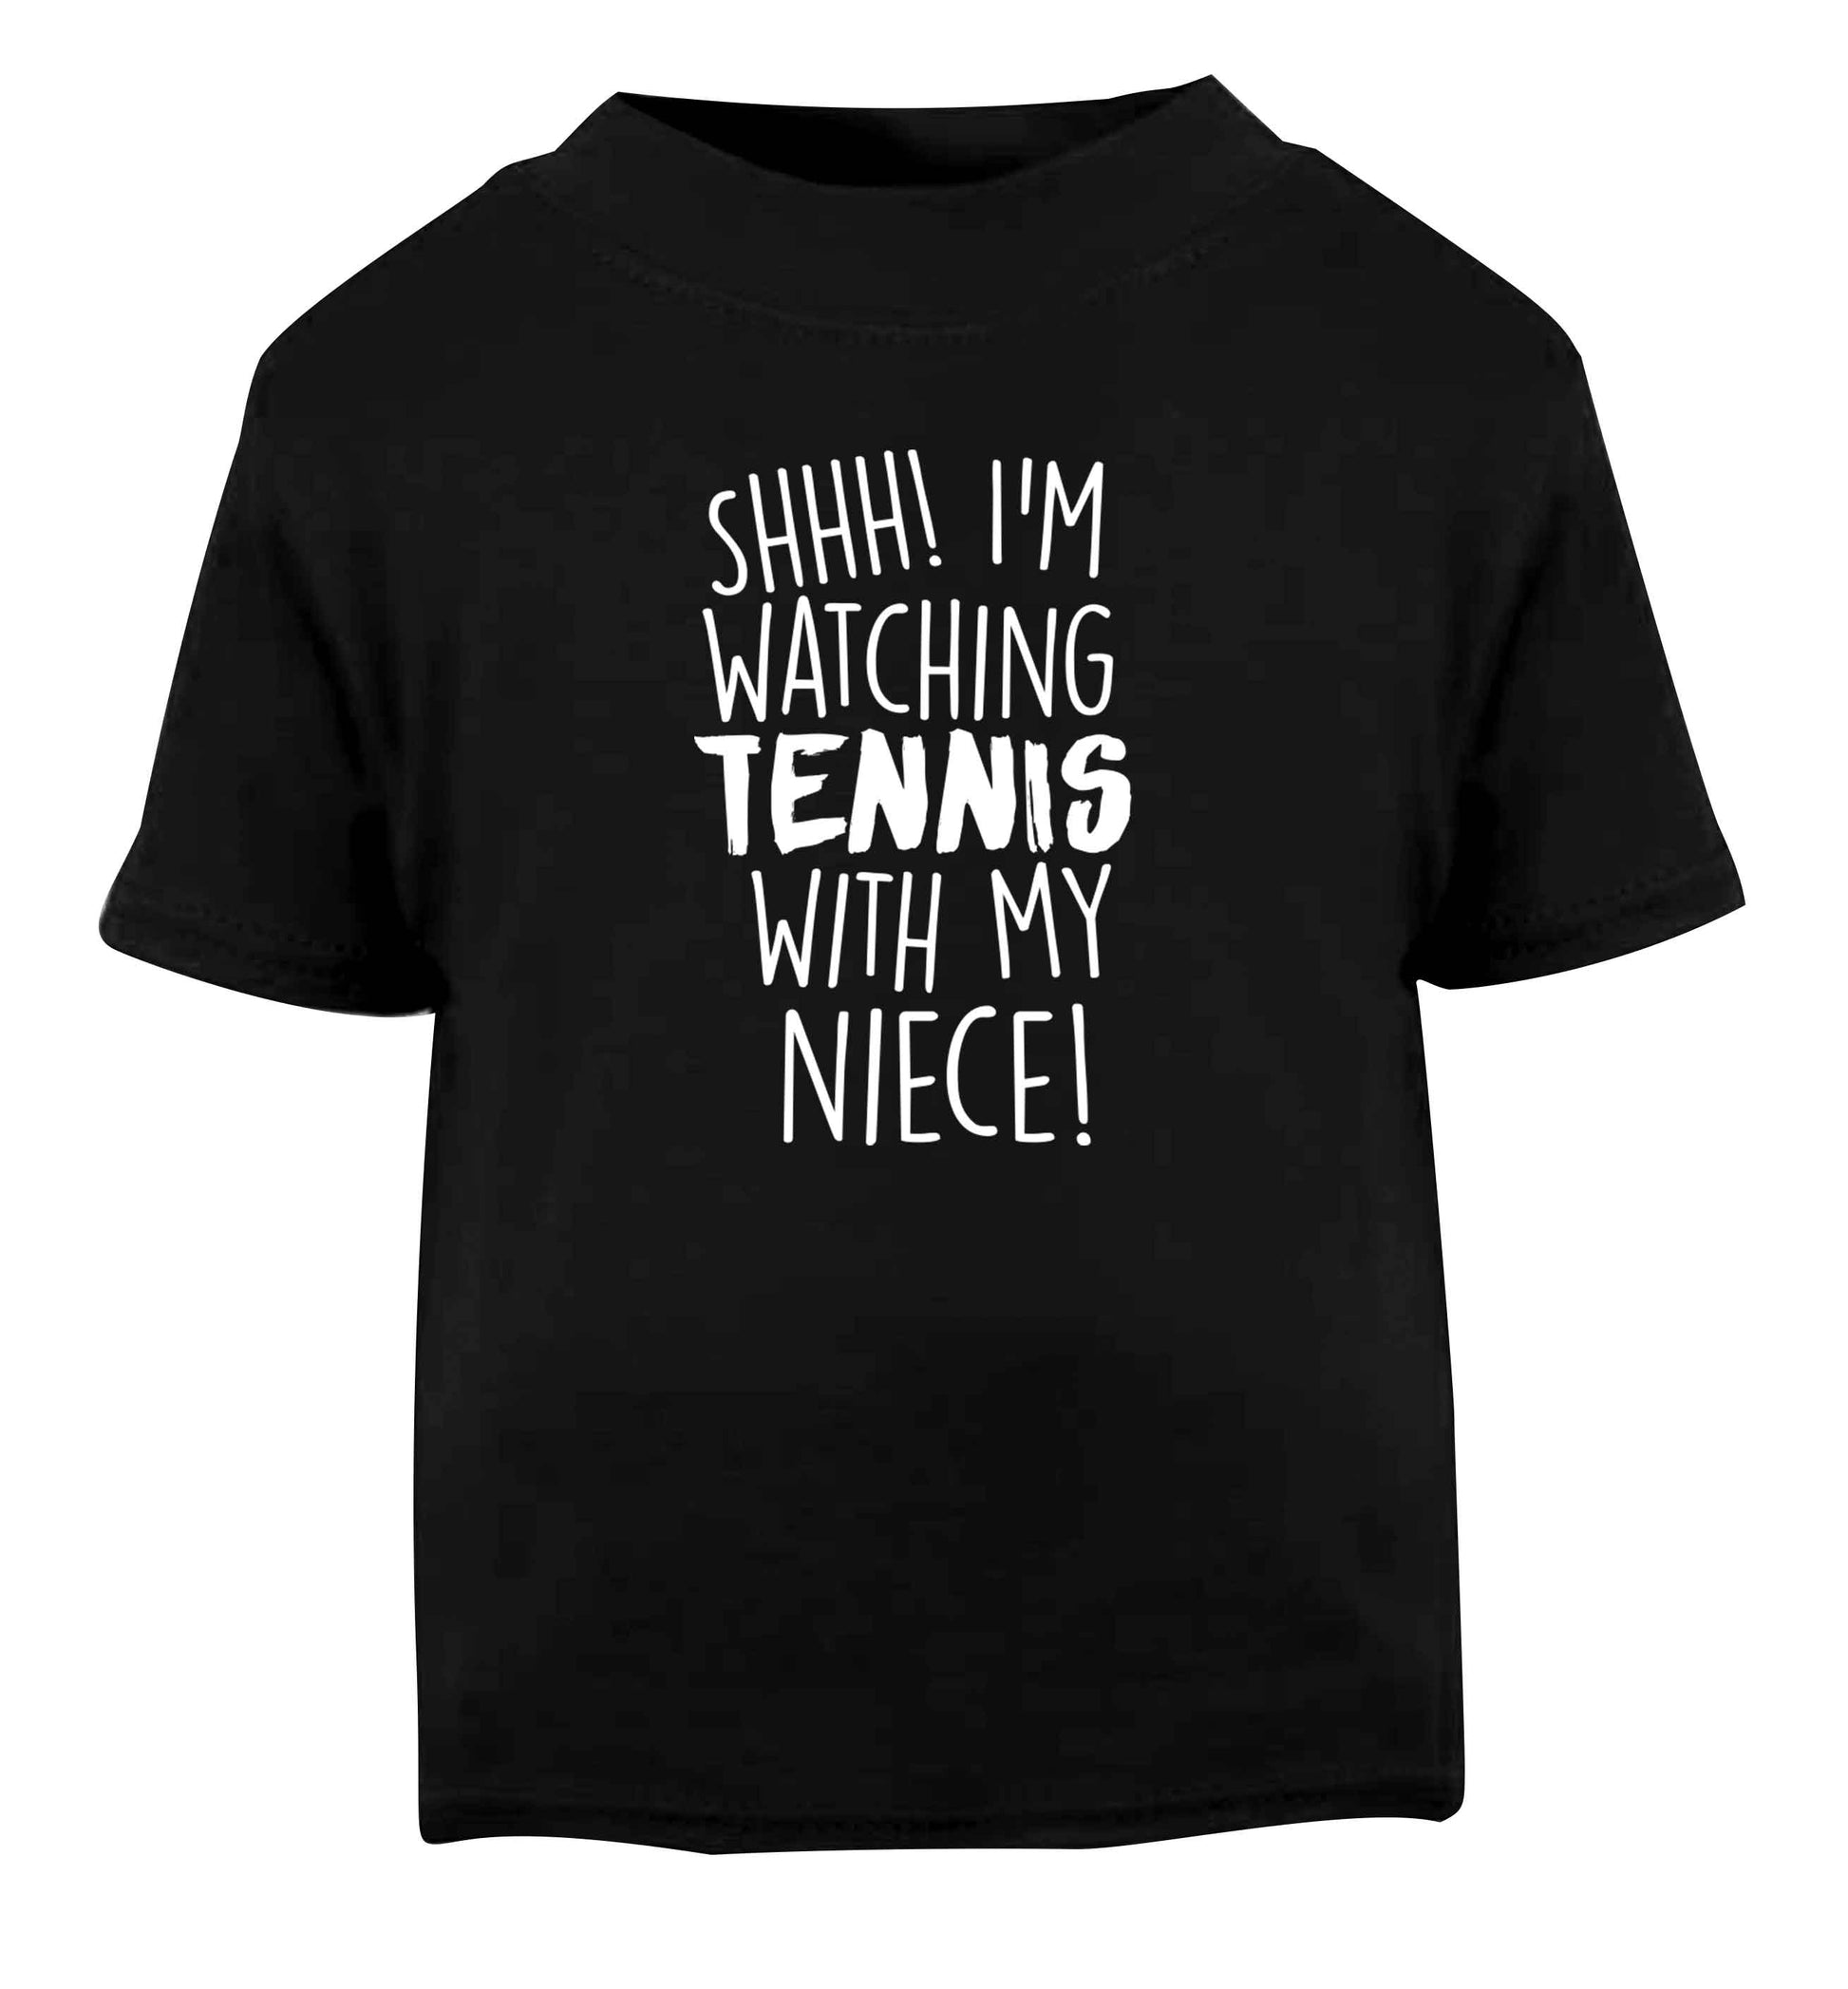 Shh! I'm watching tennis with my niece! Black Baby Toddler Tshirt 2 years